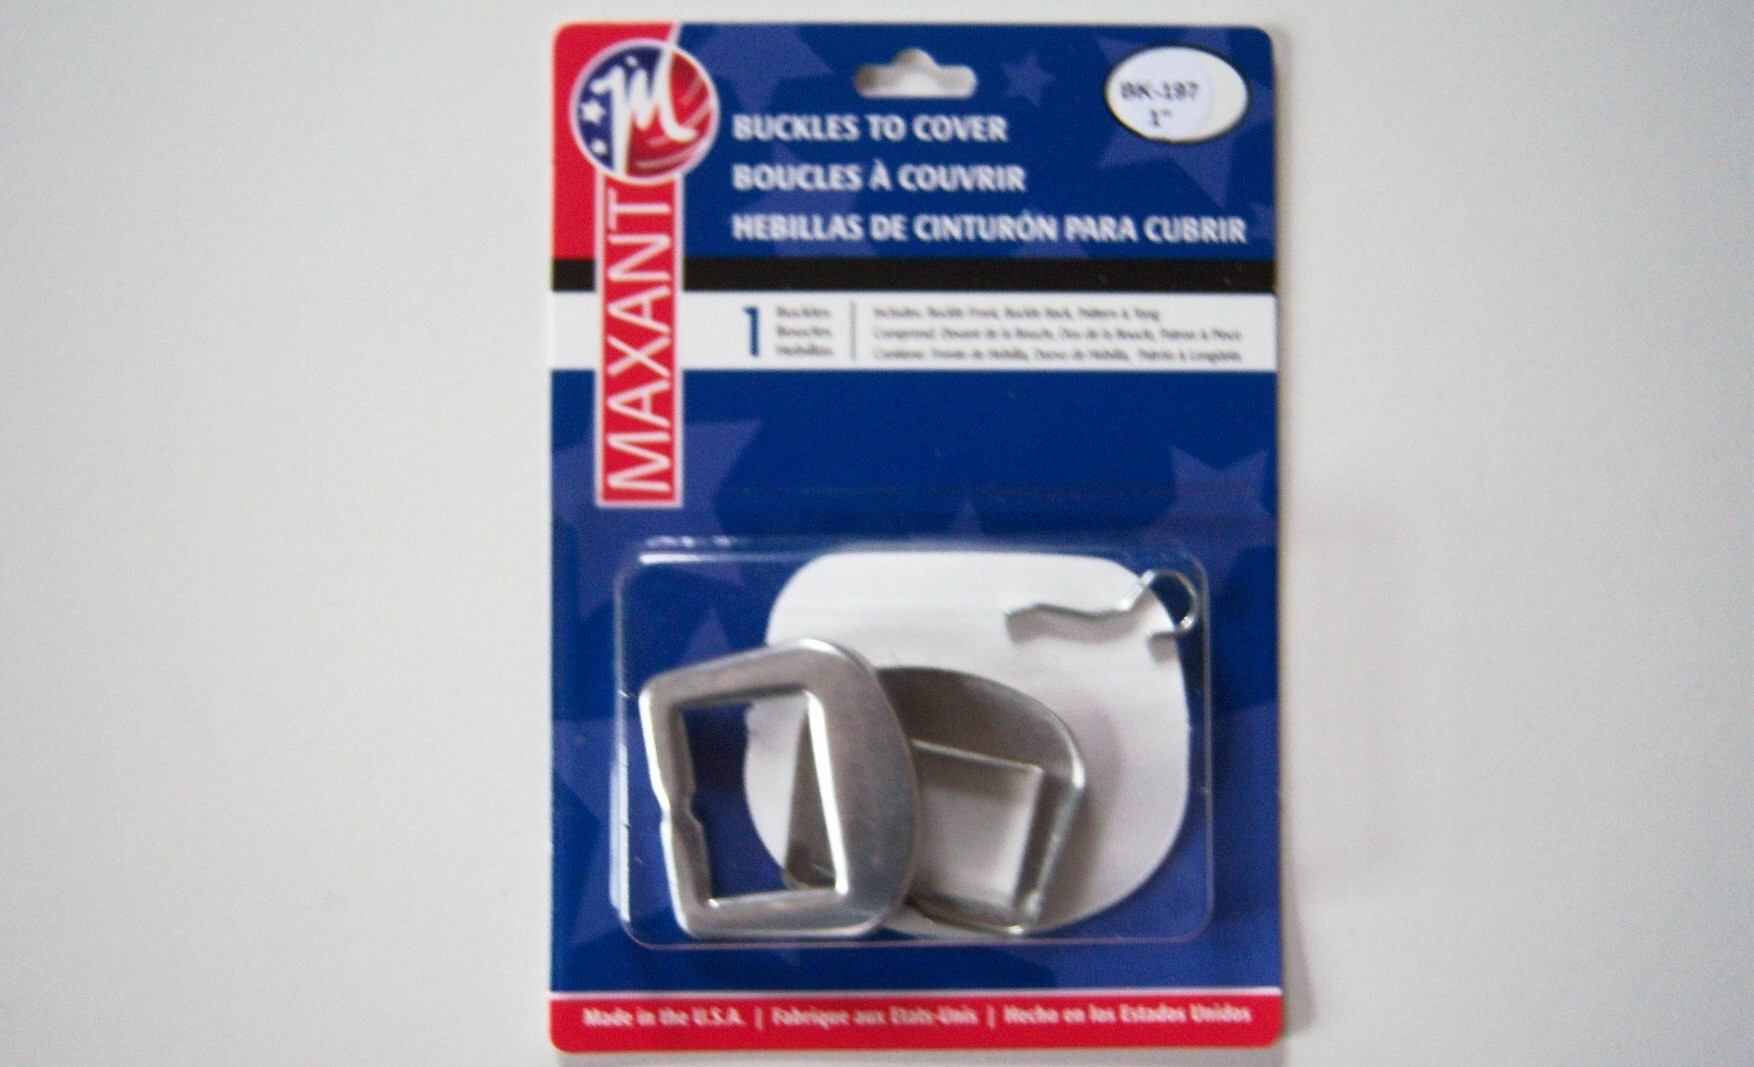 BK-197 Maxant 1" Buckle To Cover